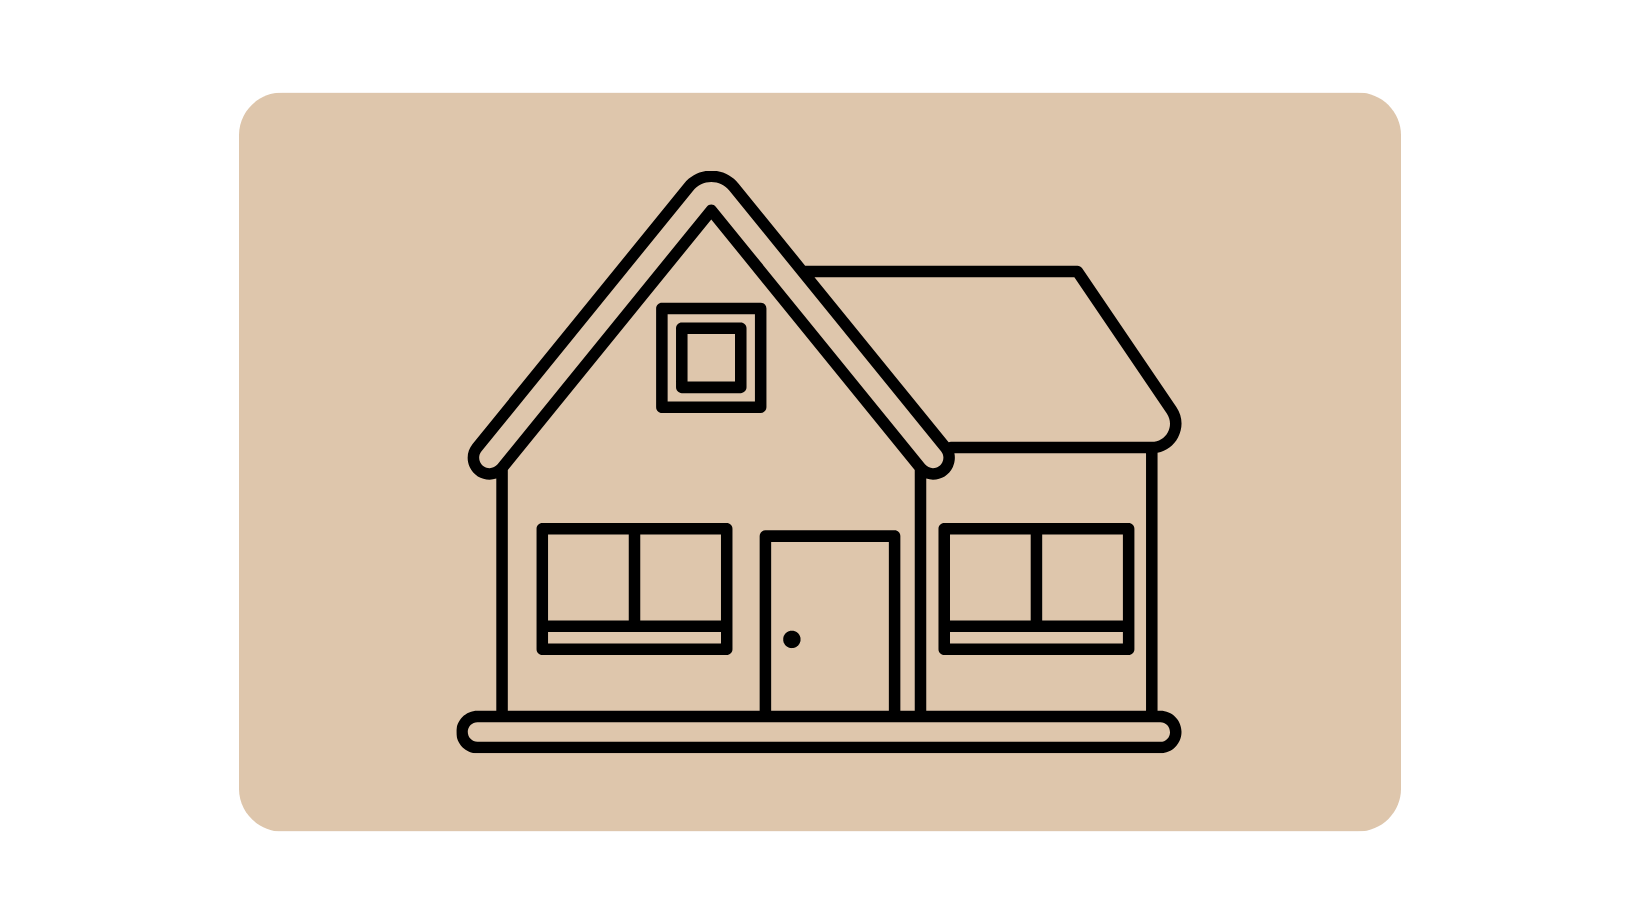 Line drawing of a house